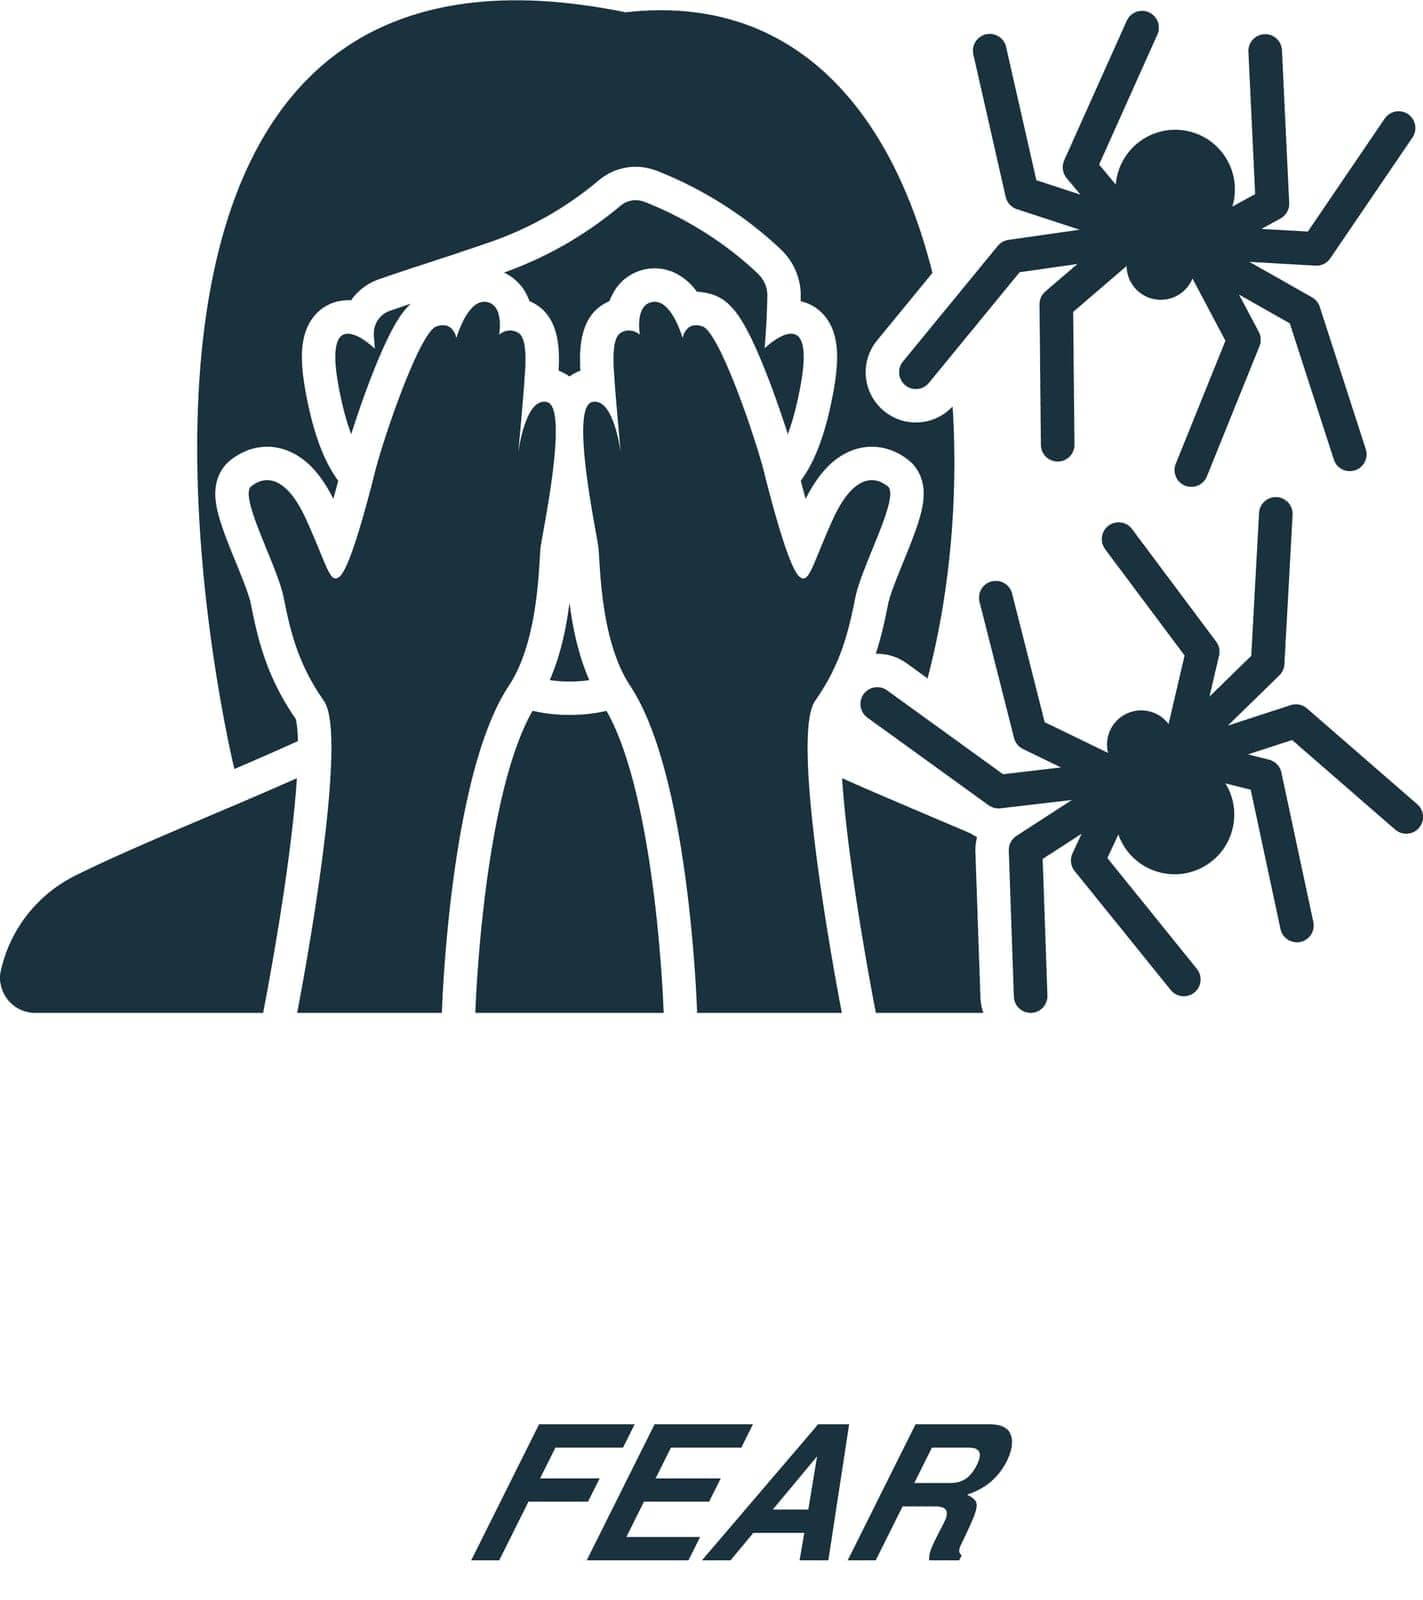 Fear icon. Monochrome simple sign from challenges collection. Fear icon for logo, templates, web design and infographics